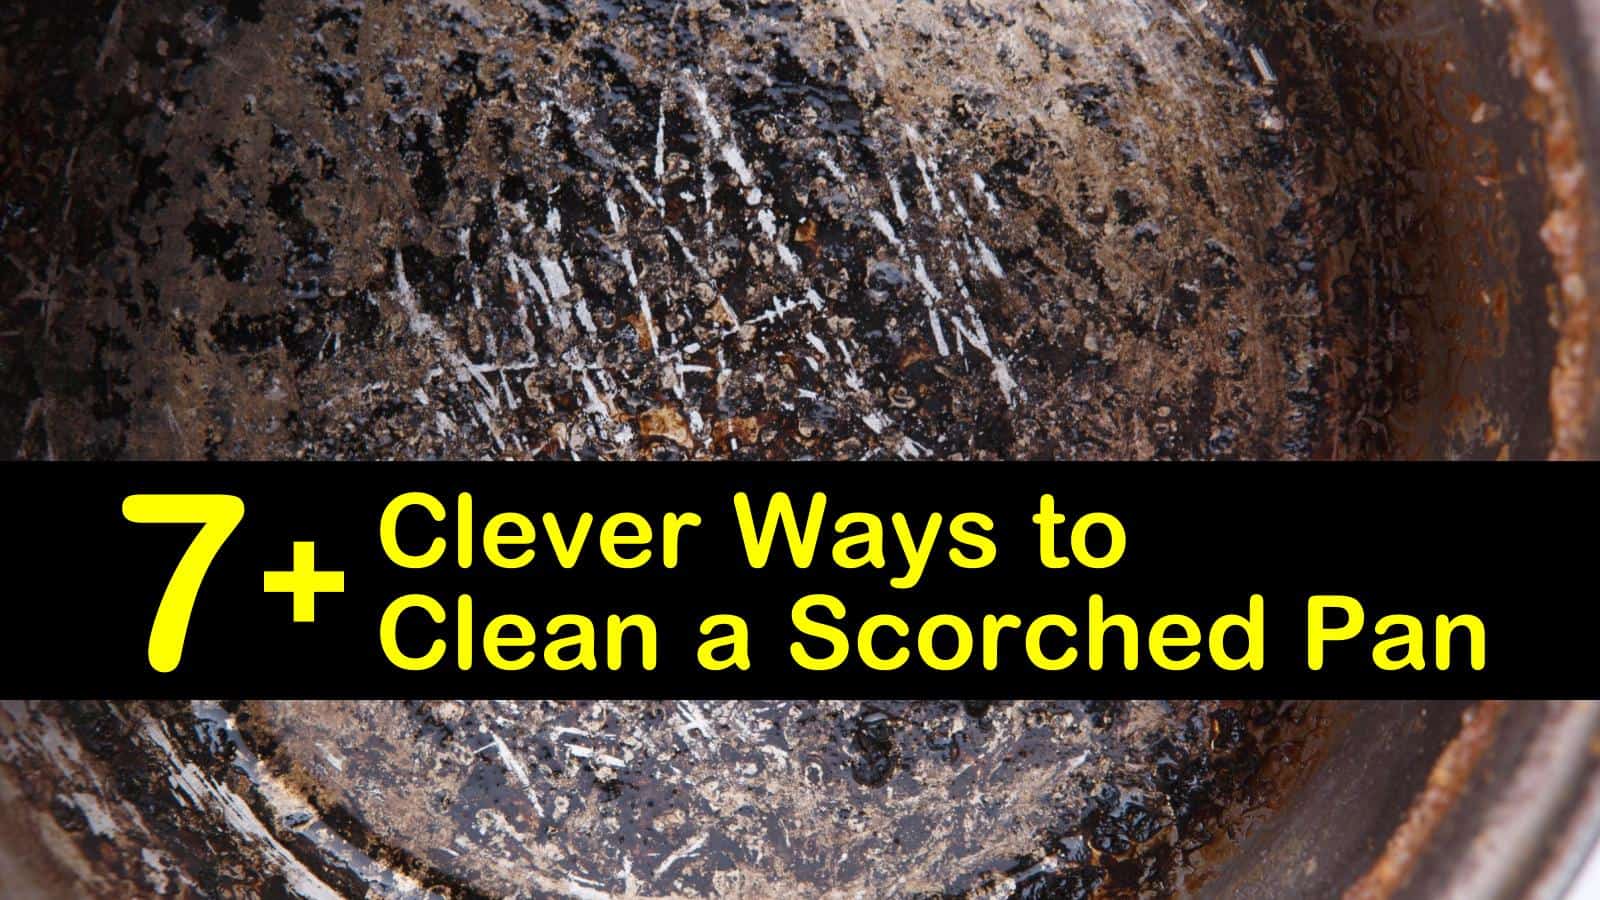 19+ Clever Ways to Clean a Scorched Pan